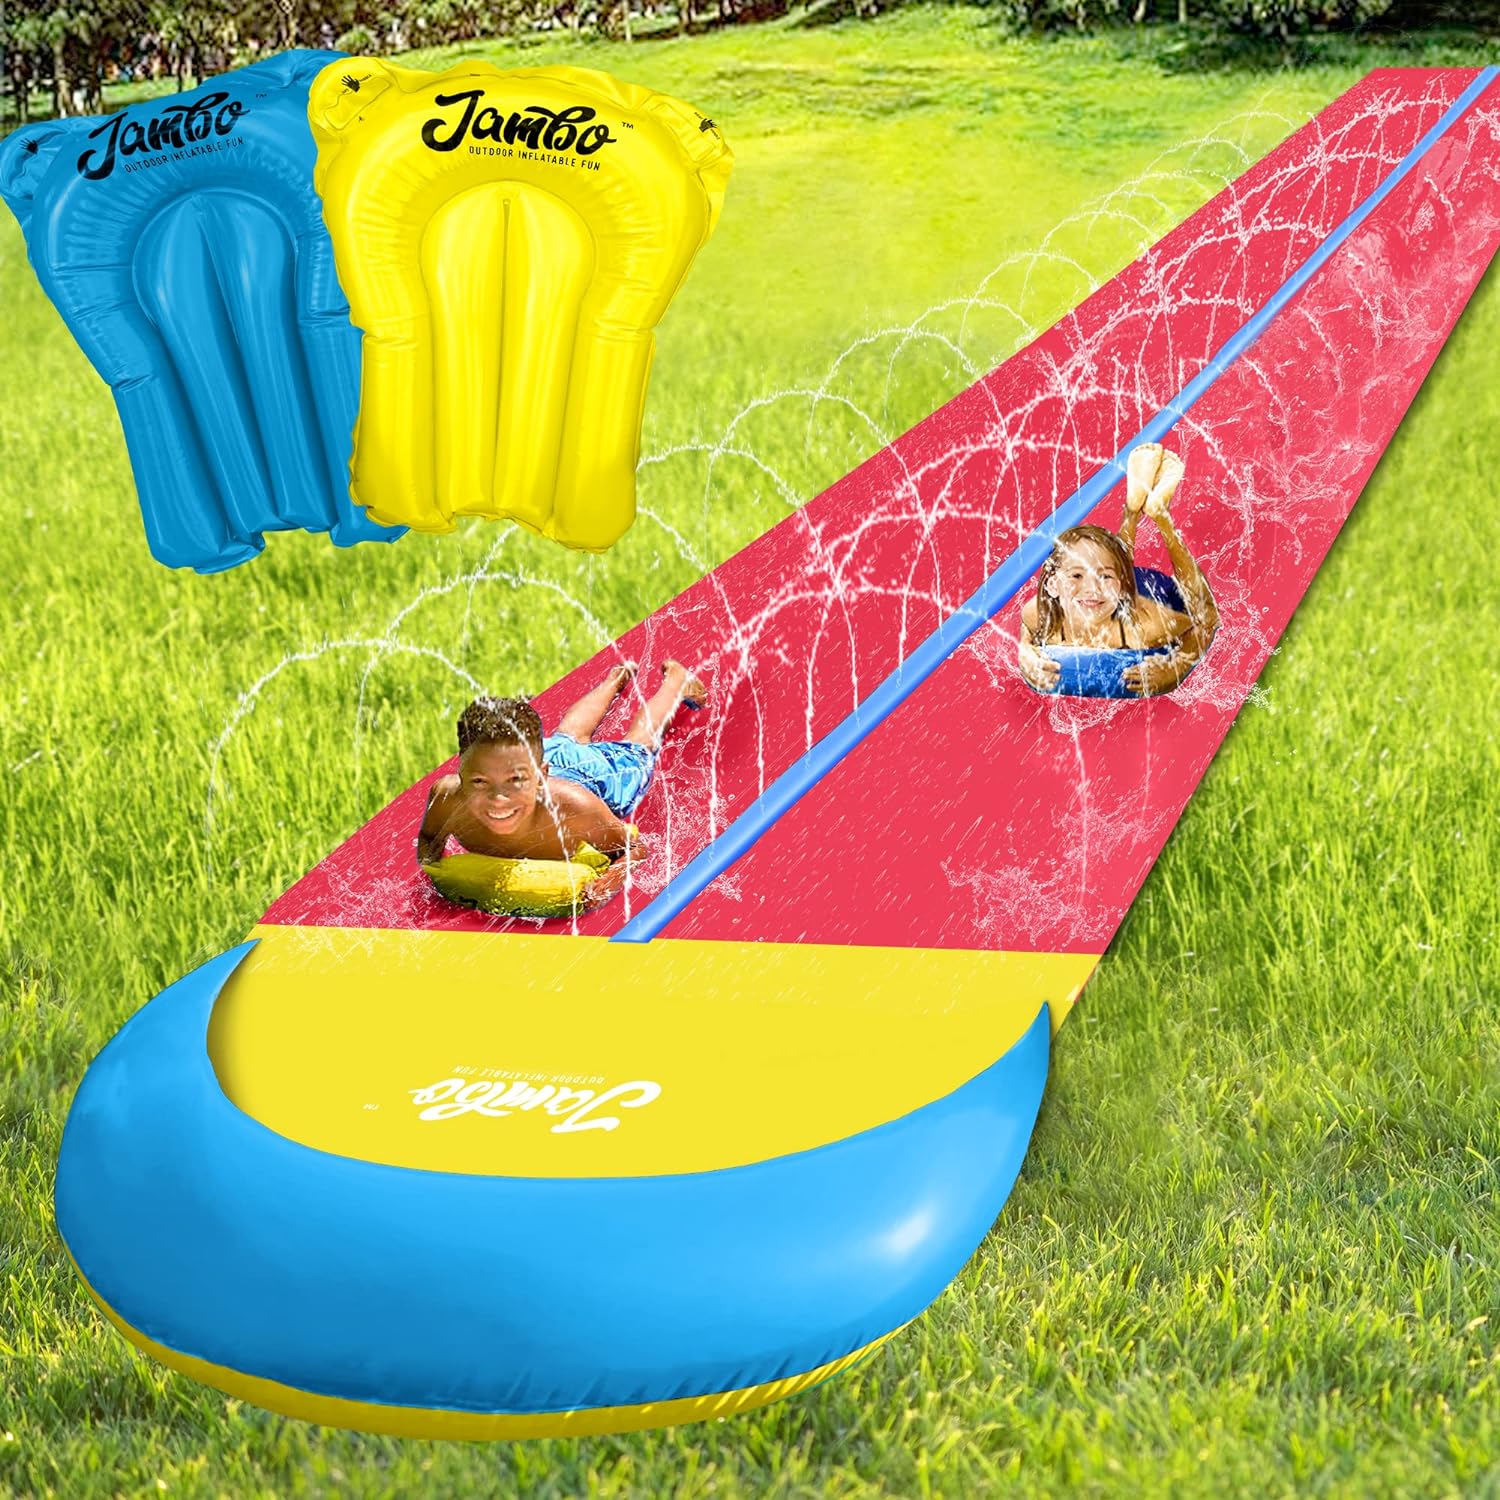 Jambo 32' XXL Extra Long Slip Splash and Slide with 2 Bodyboards, Heavy Duty Double Lane Water Slide with Inflatable Crash Pad, Slip Outdoor Backyard Water Toys and Slides